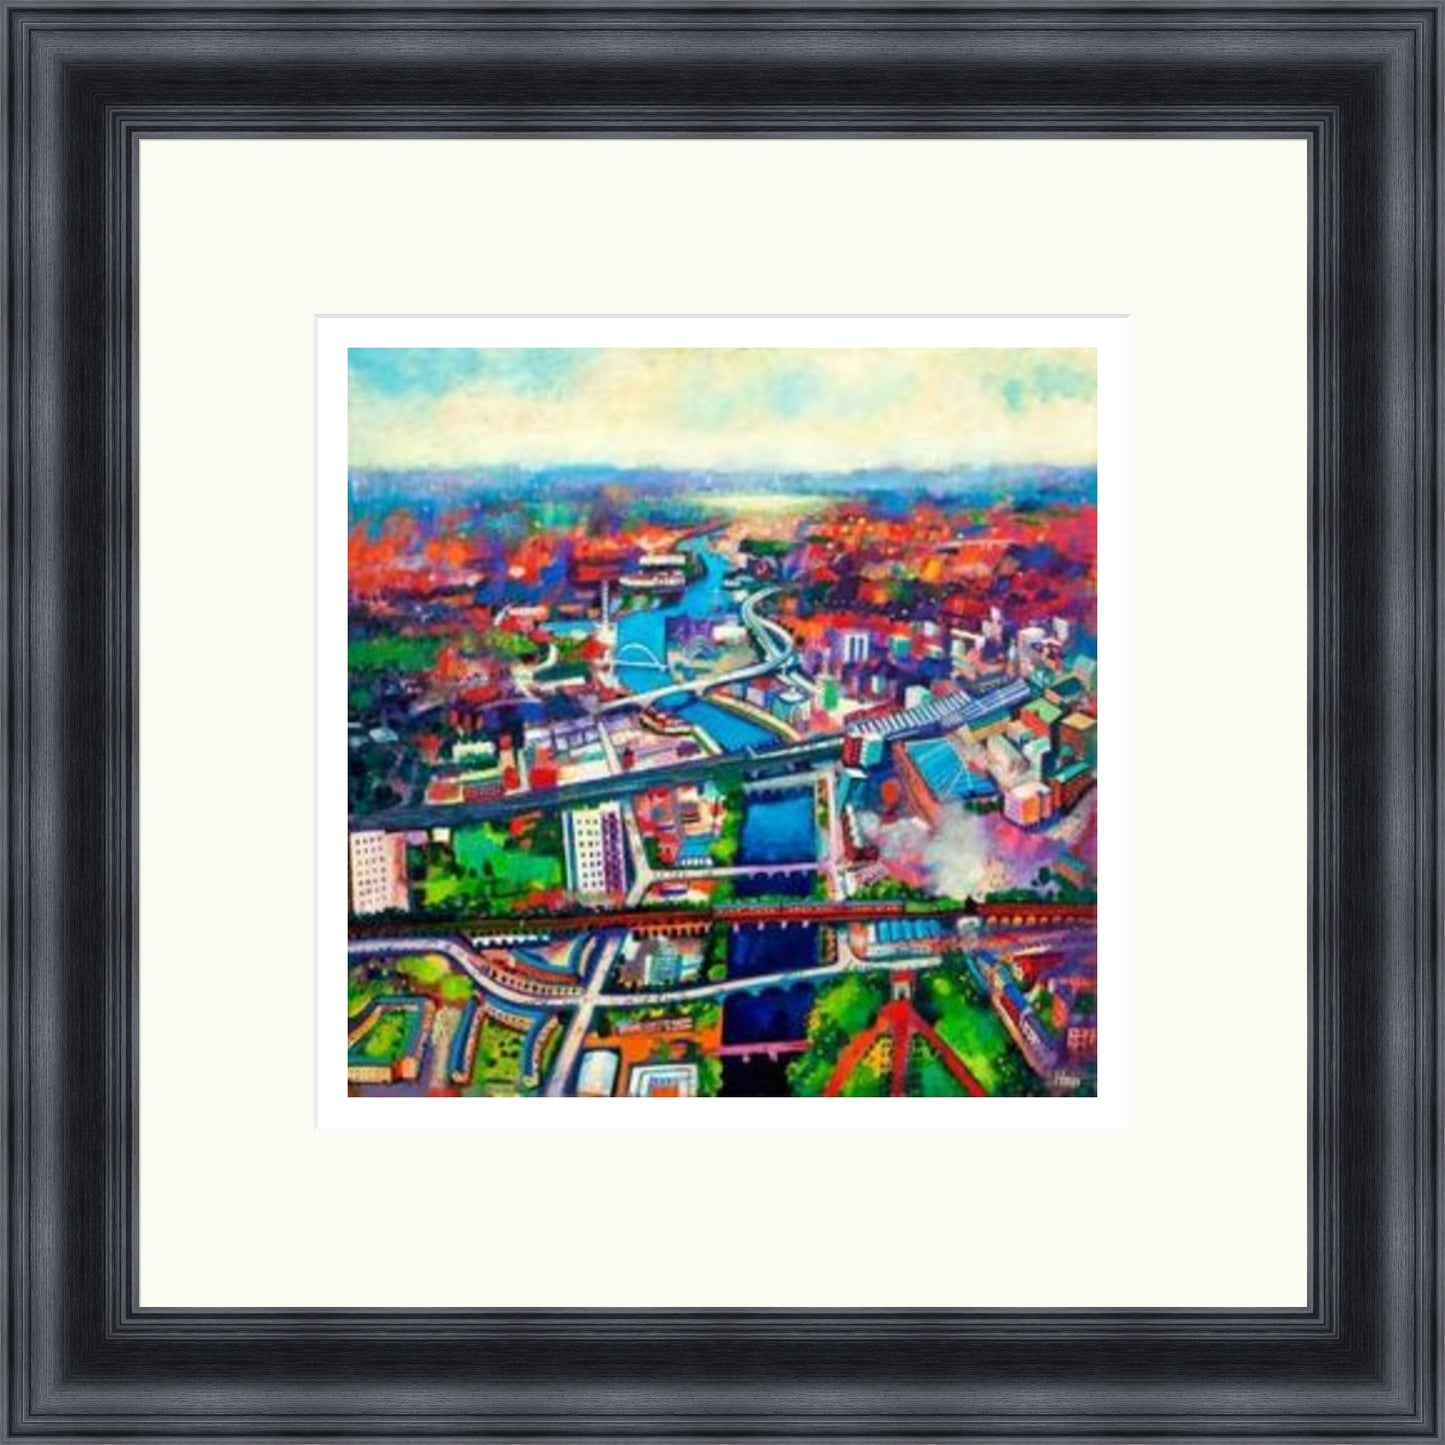 The Clyde, The Wonderful River Clyde by Rob Hain